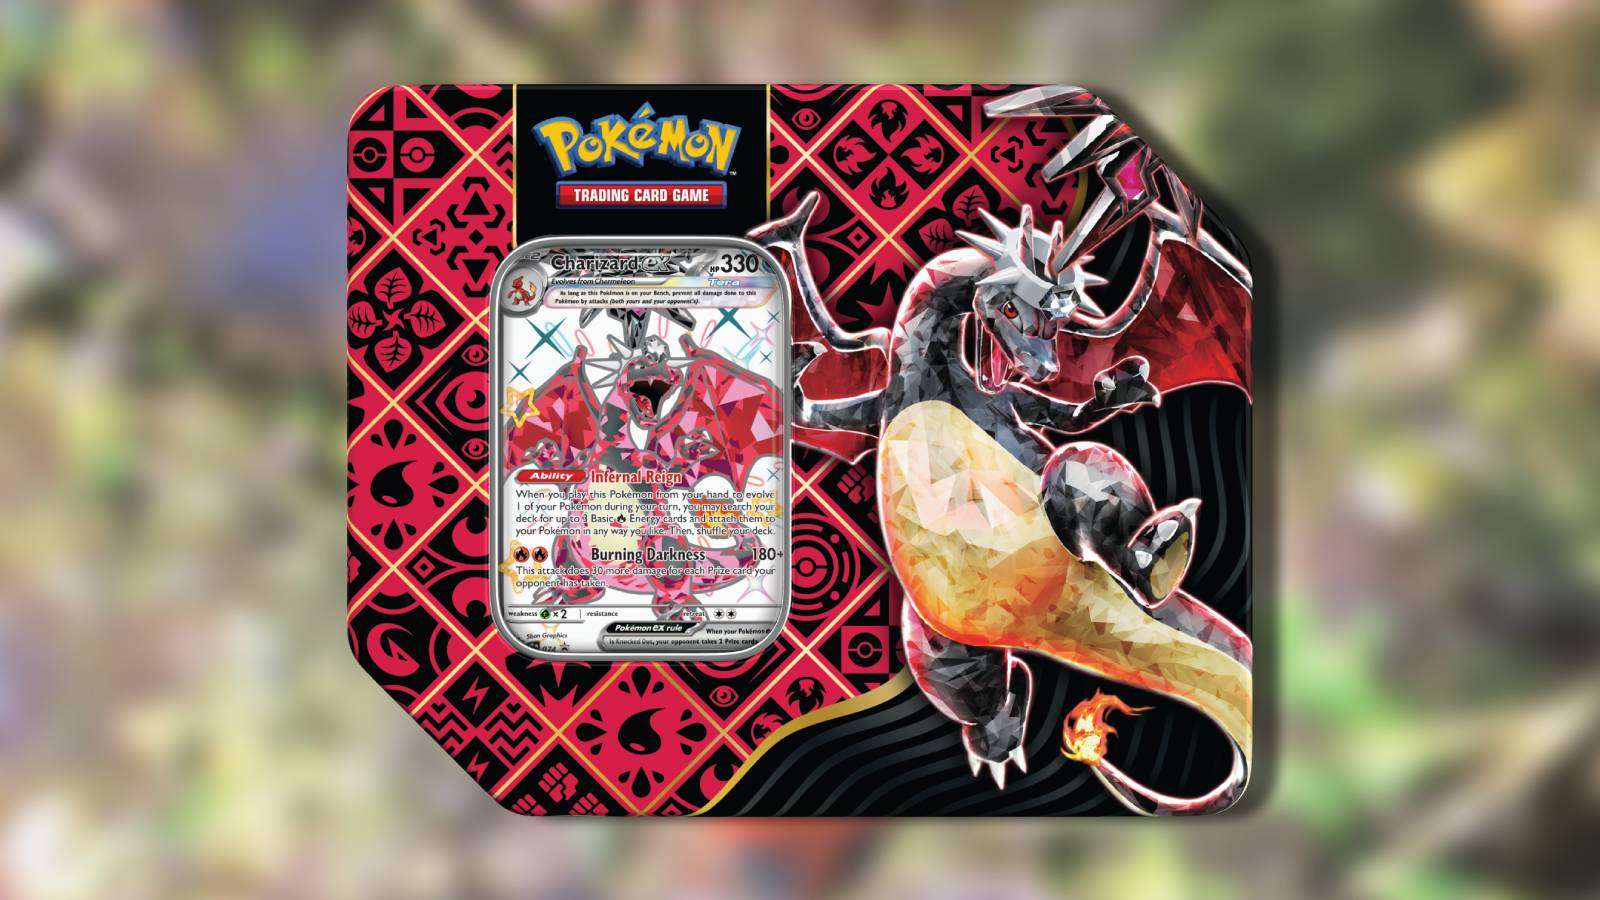 Pokemon TCG Paldean Fates tins are visible against a blurred background